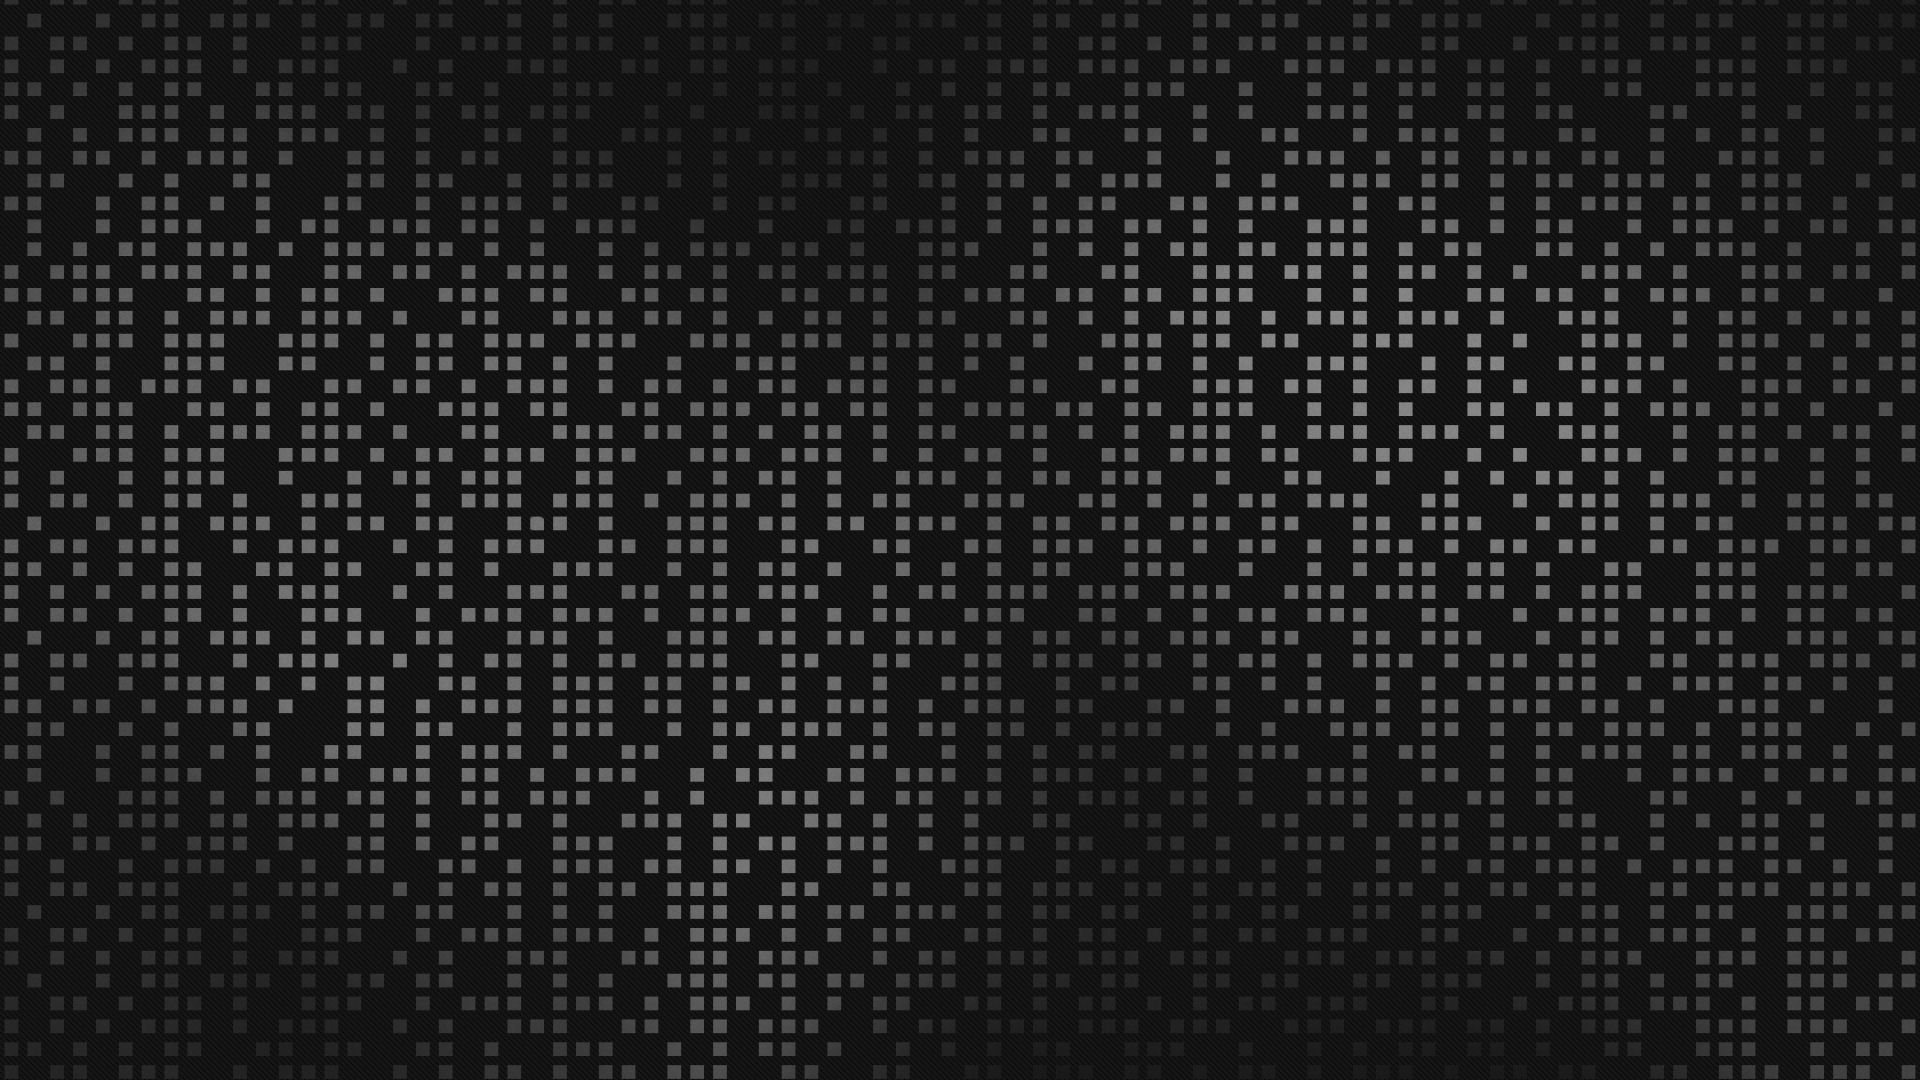 Black Texture Picture Wallpapers 996 - HD Wallpaper Site